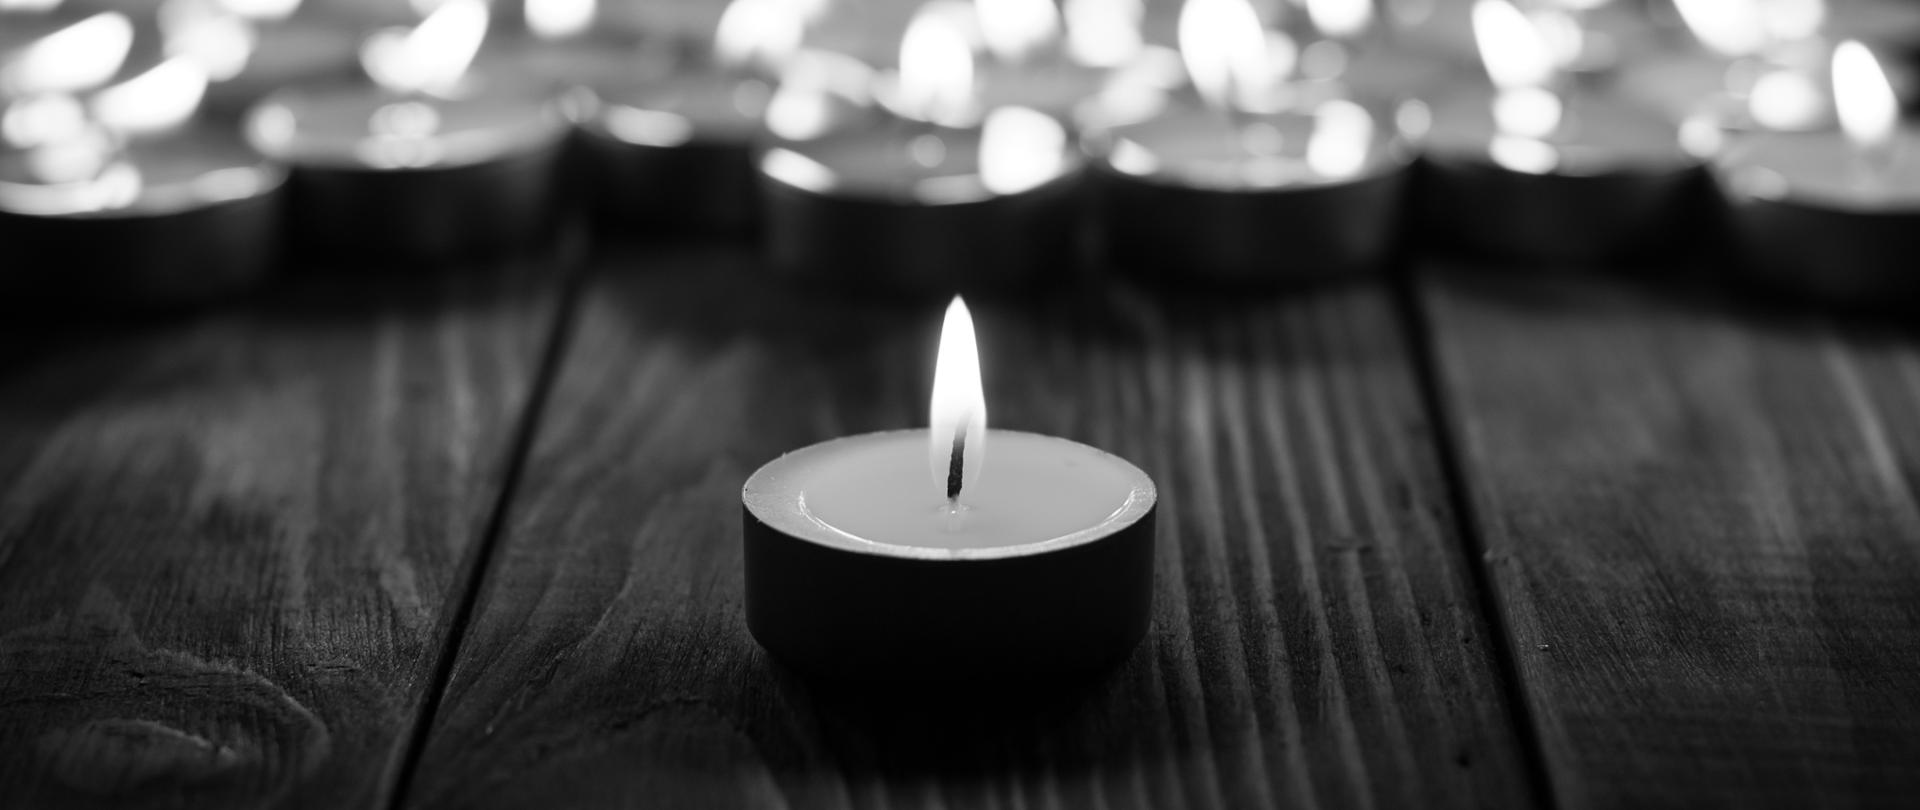 Group of burning candles on black background. Black and white